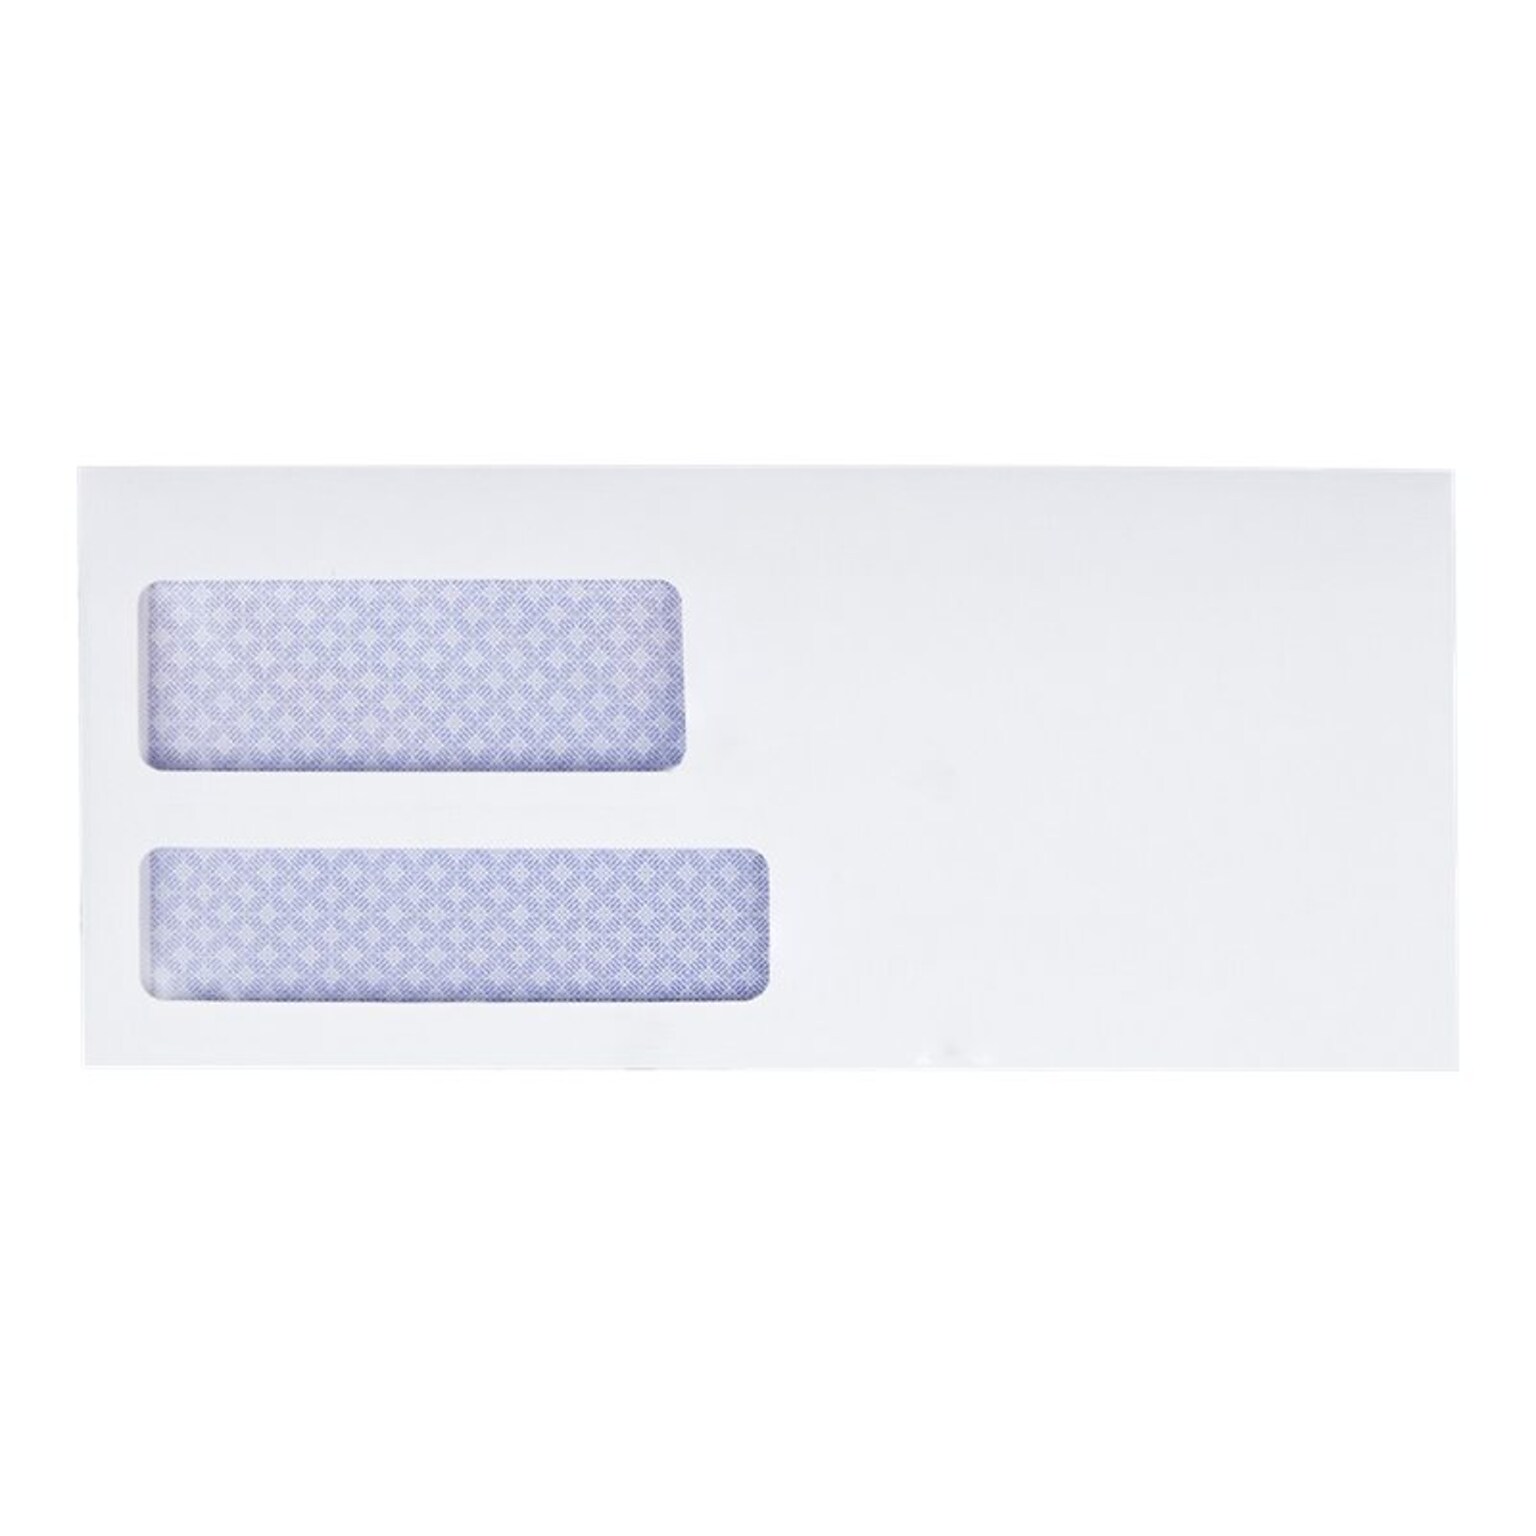 Quality Park Reveal-N-Seal Security Tinted #9 Double Window Envelopes, 3 7/8 x 8 7/8, White Wove, 500/Box (QUA67529)